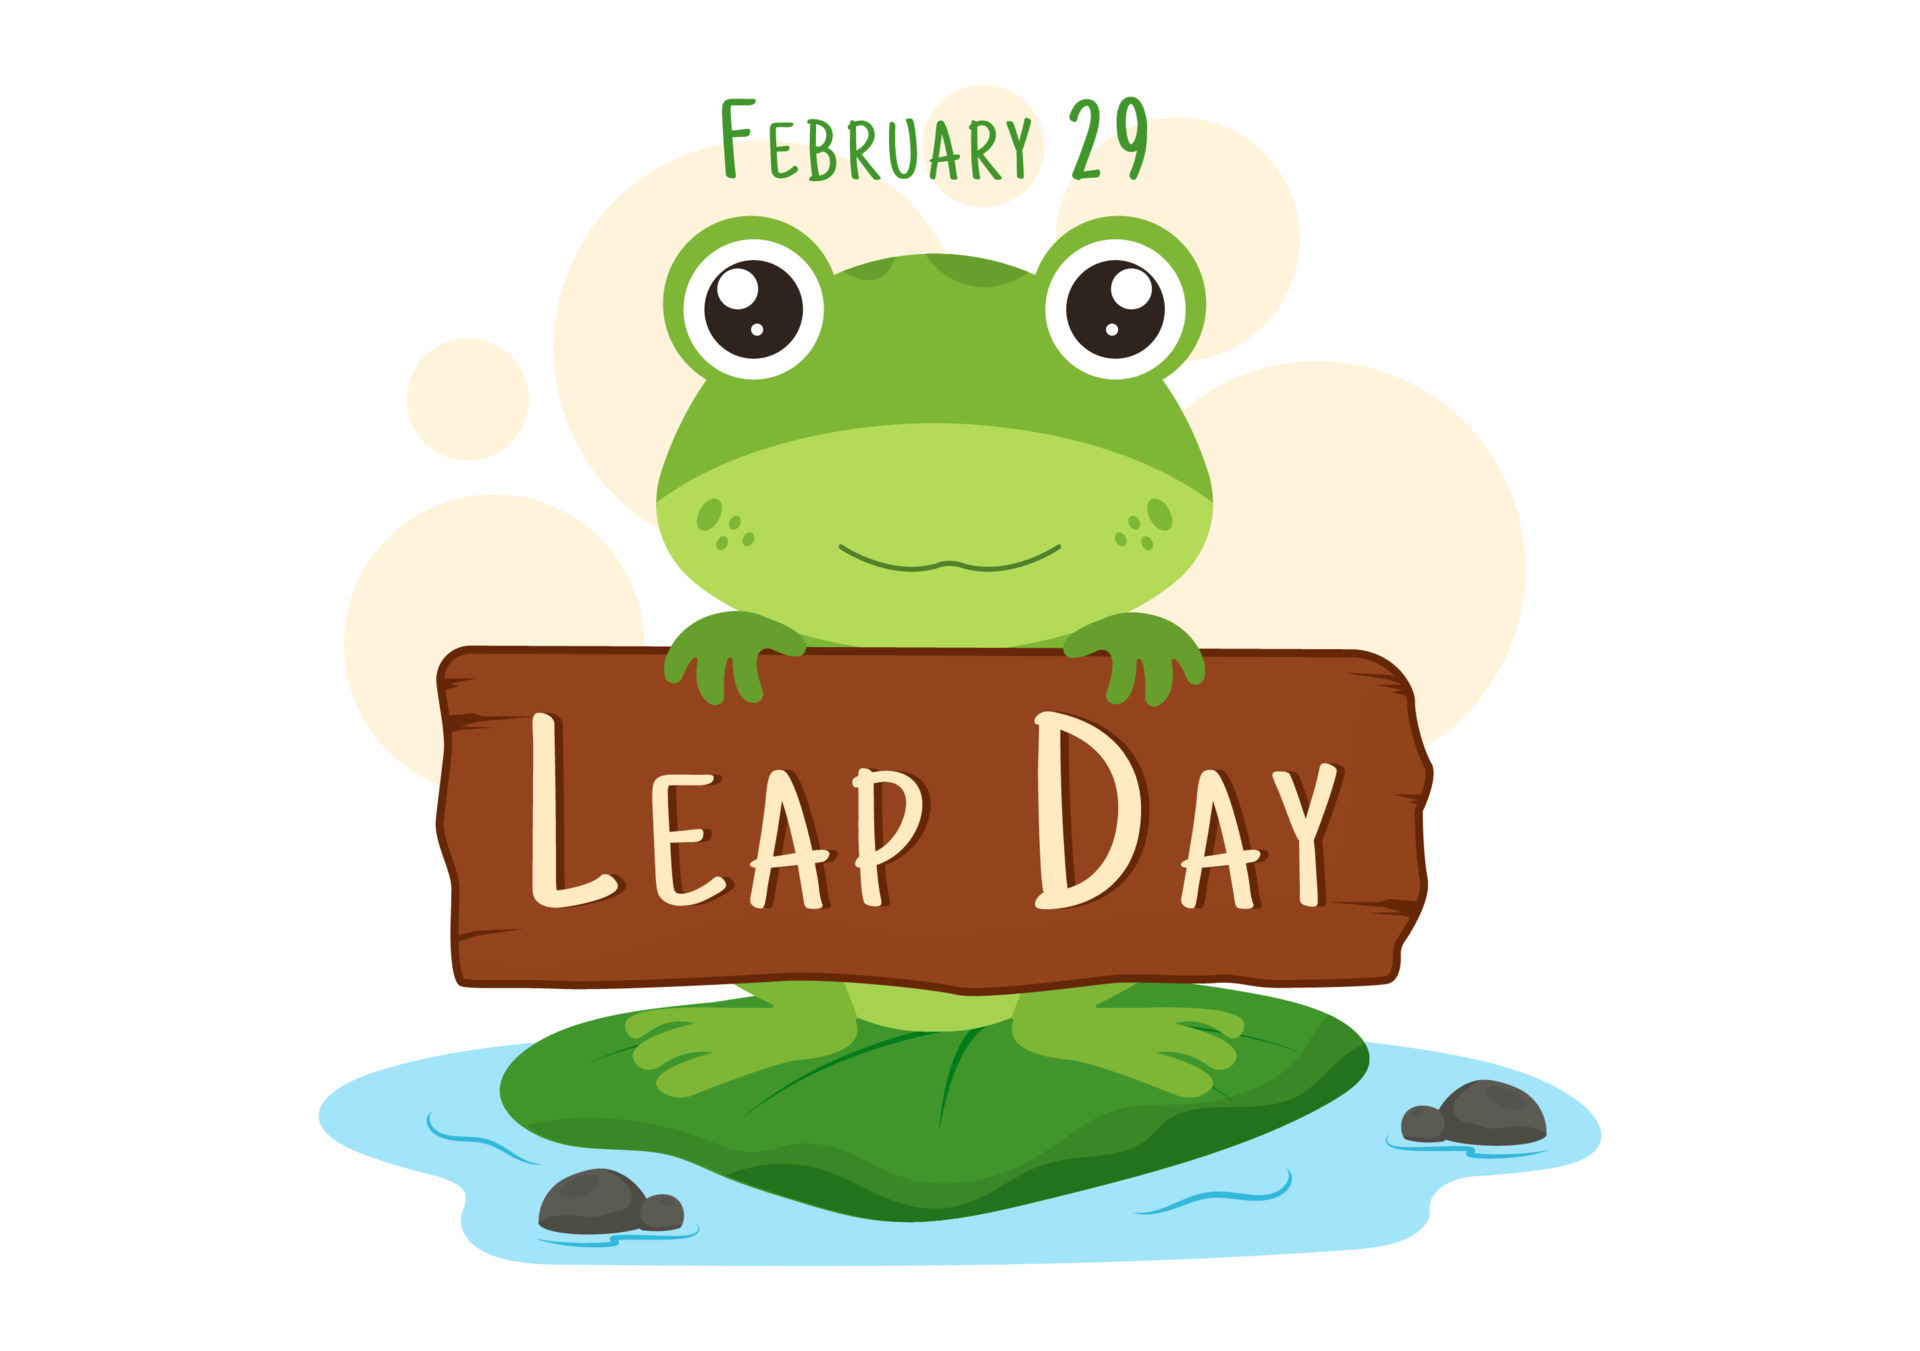 Leap Day image with frog holding sign